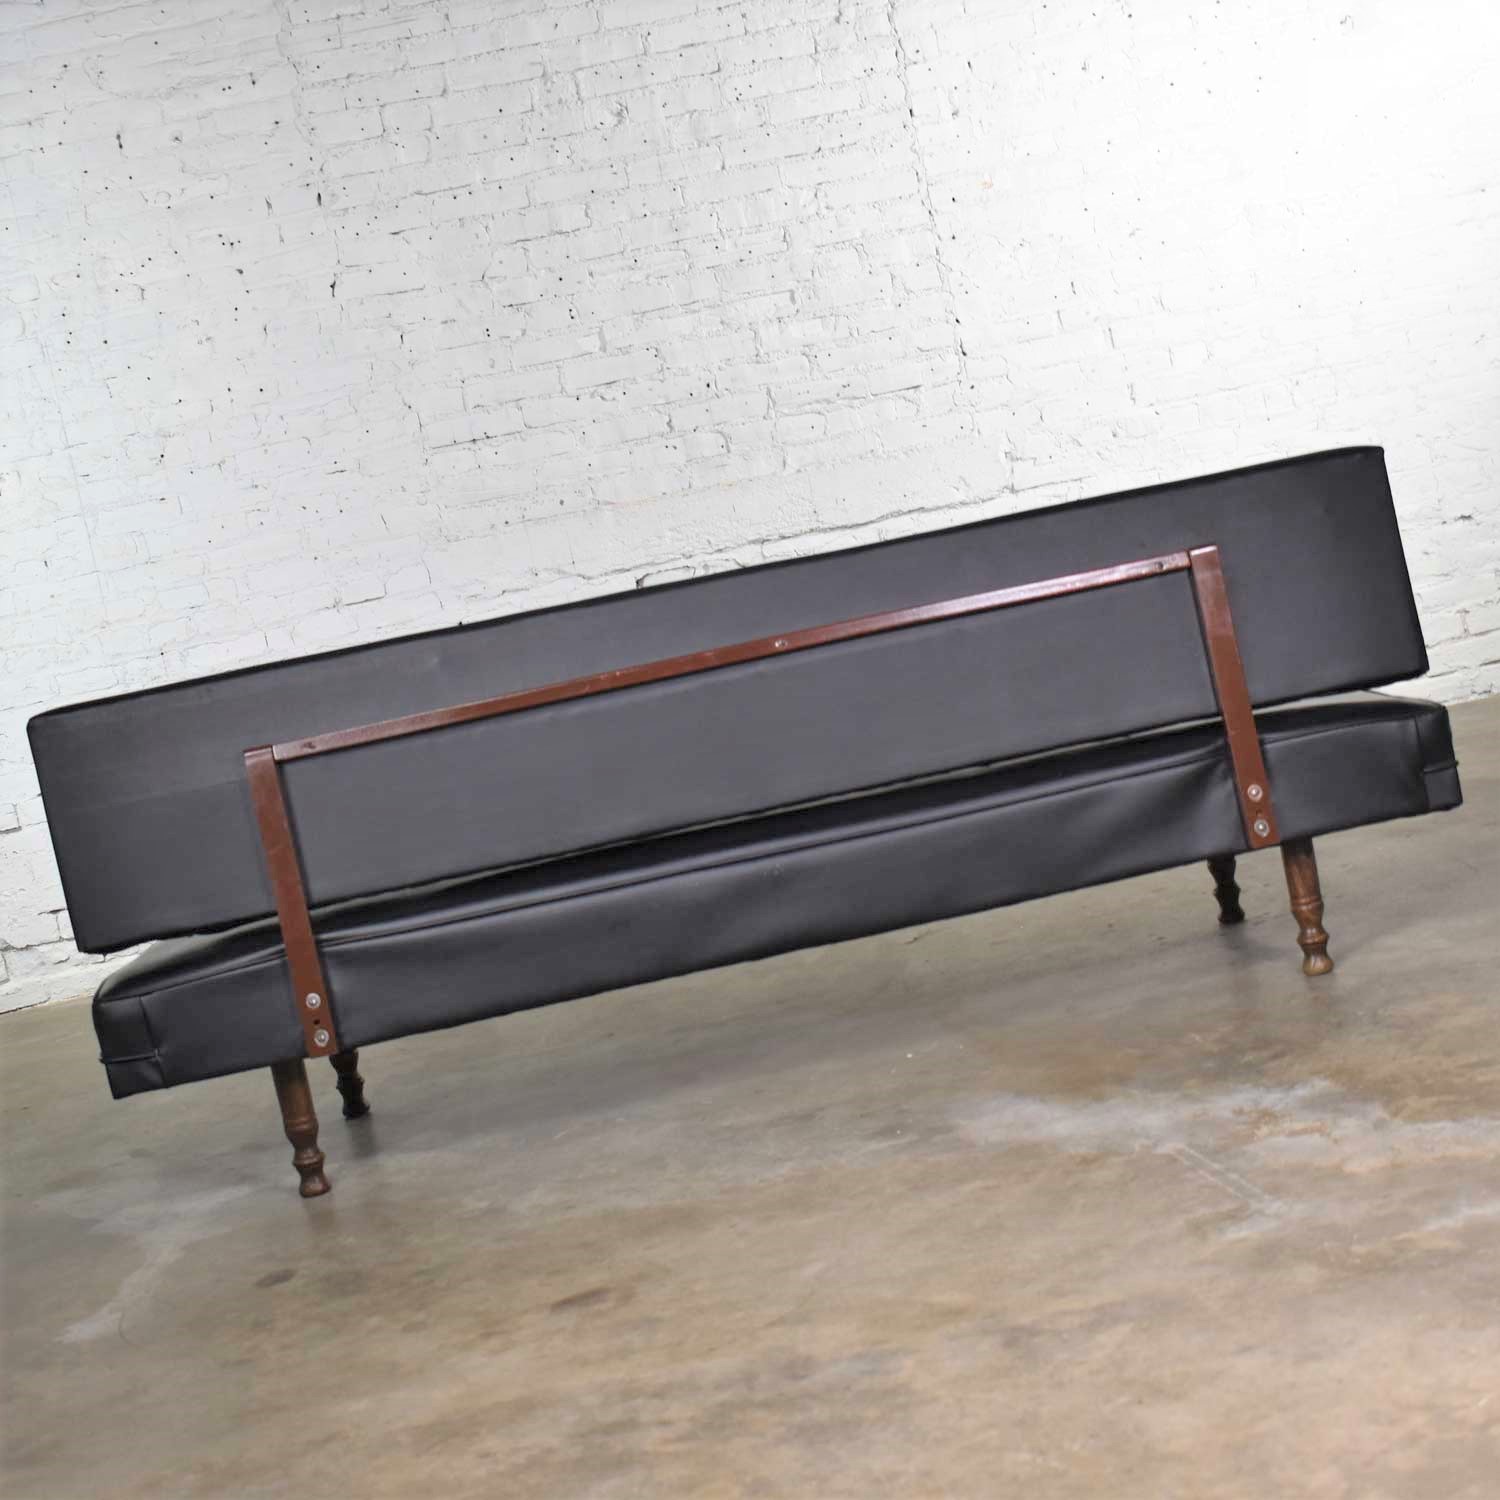 Vintage Mid Century Modern Black Vinyl Faux Leather Convertible Sofa by Universal of High Point